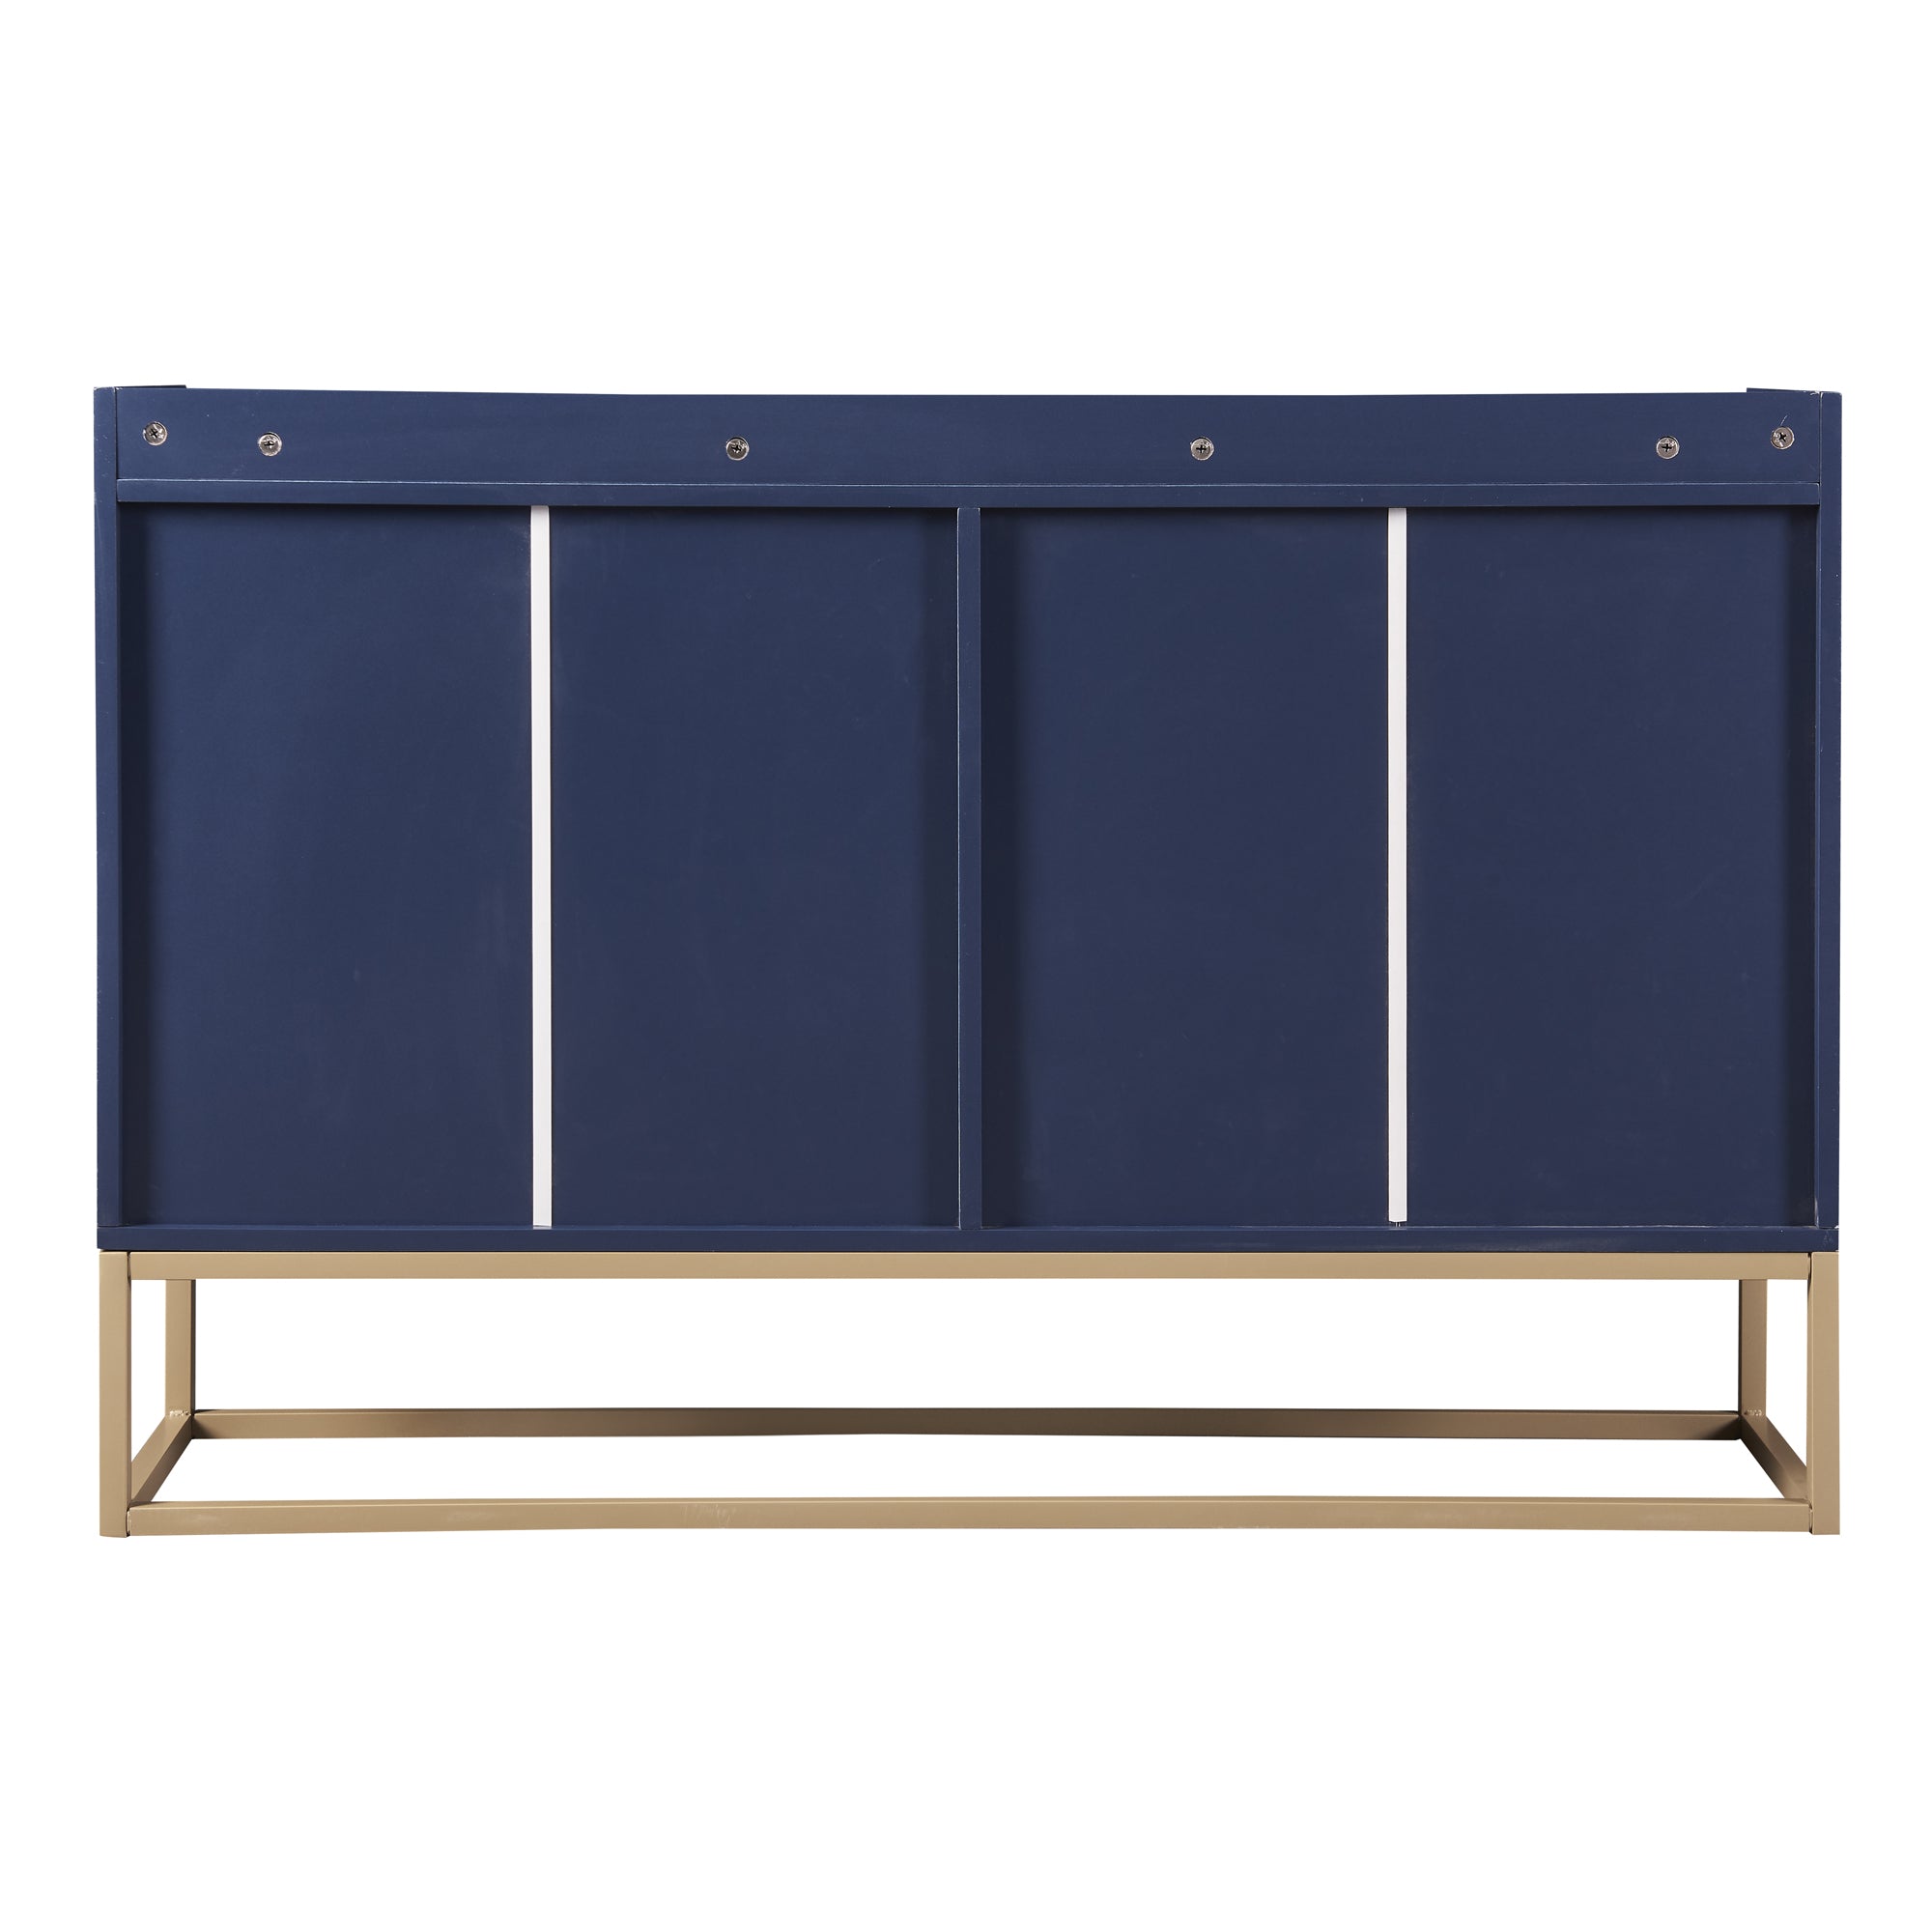 Gwendolyn Sideboard Elegant Buffet Cabinet with Large Storage Space - Pier 1